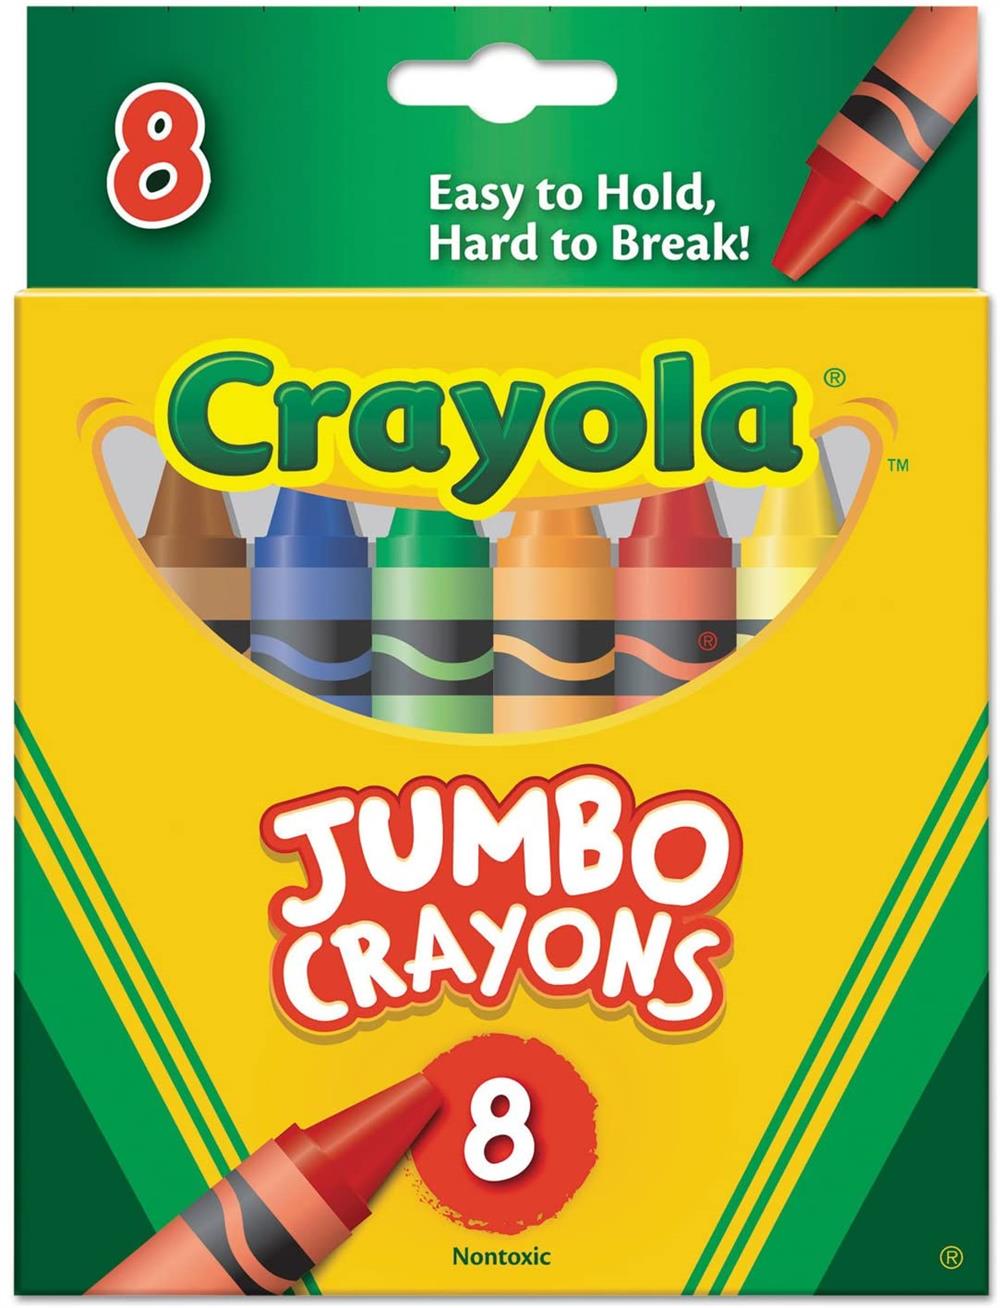 New In Box - 2 Pack Crayola Glitter Crayons - 8 Count per Box = Total 16